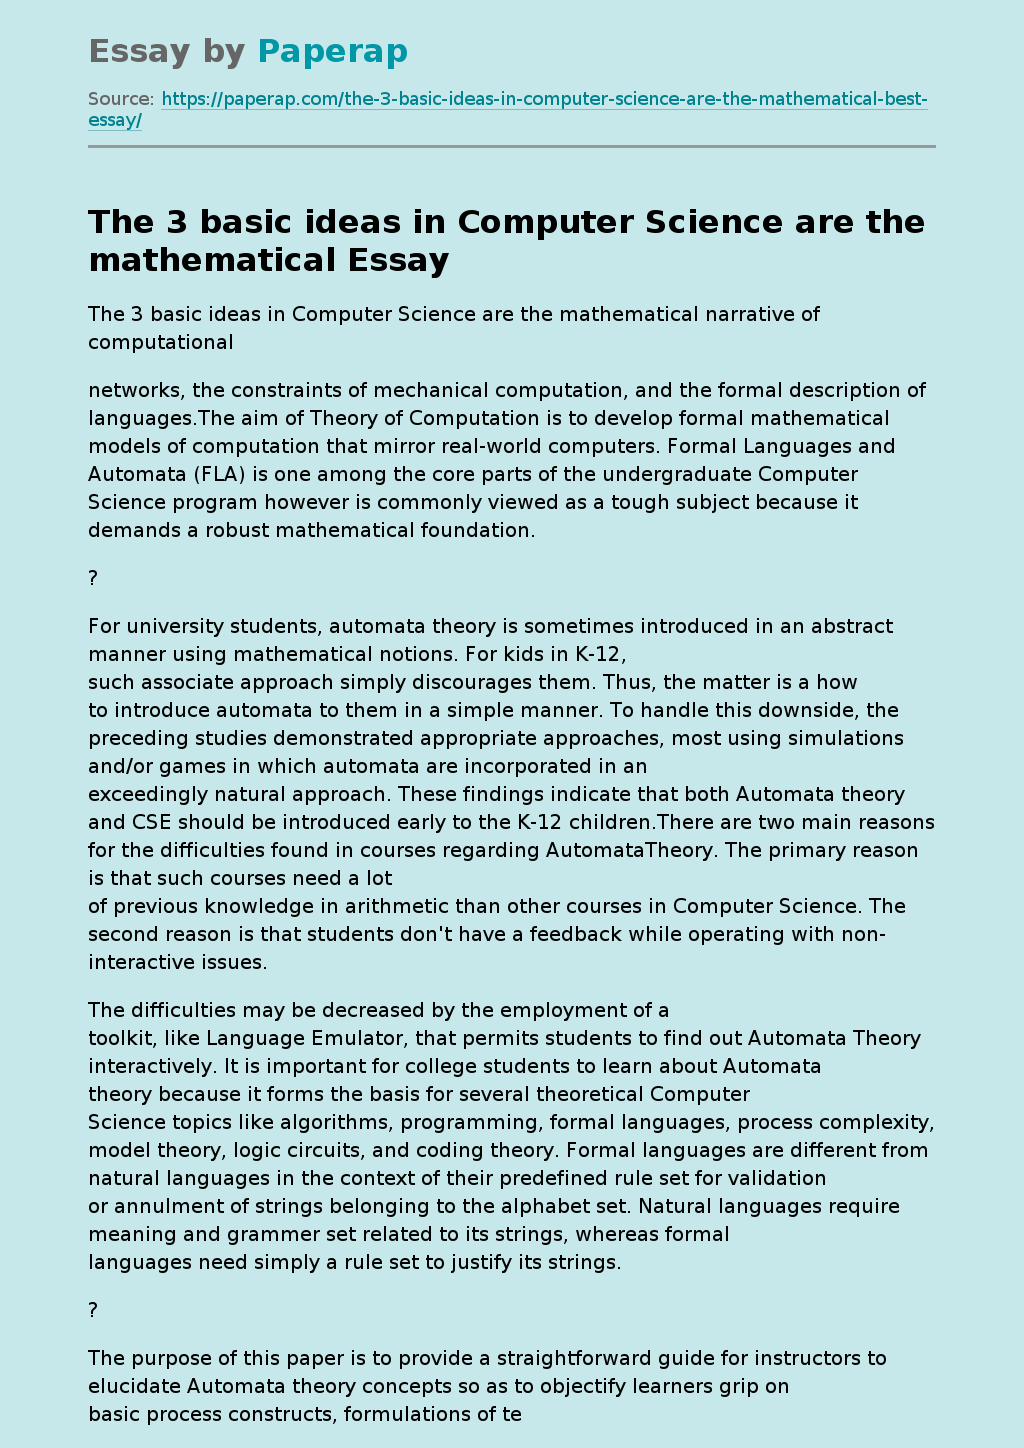 The 3 basic ideas in computer science are the mathematical